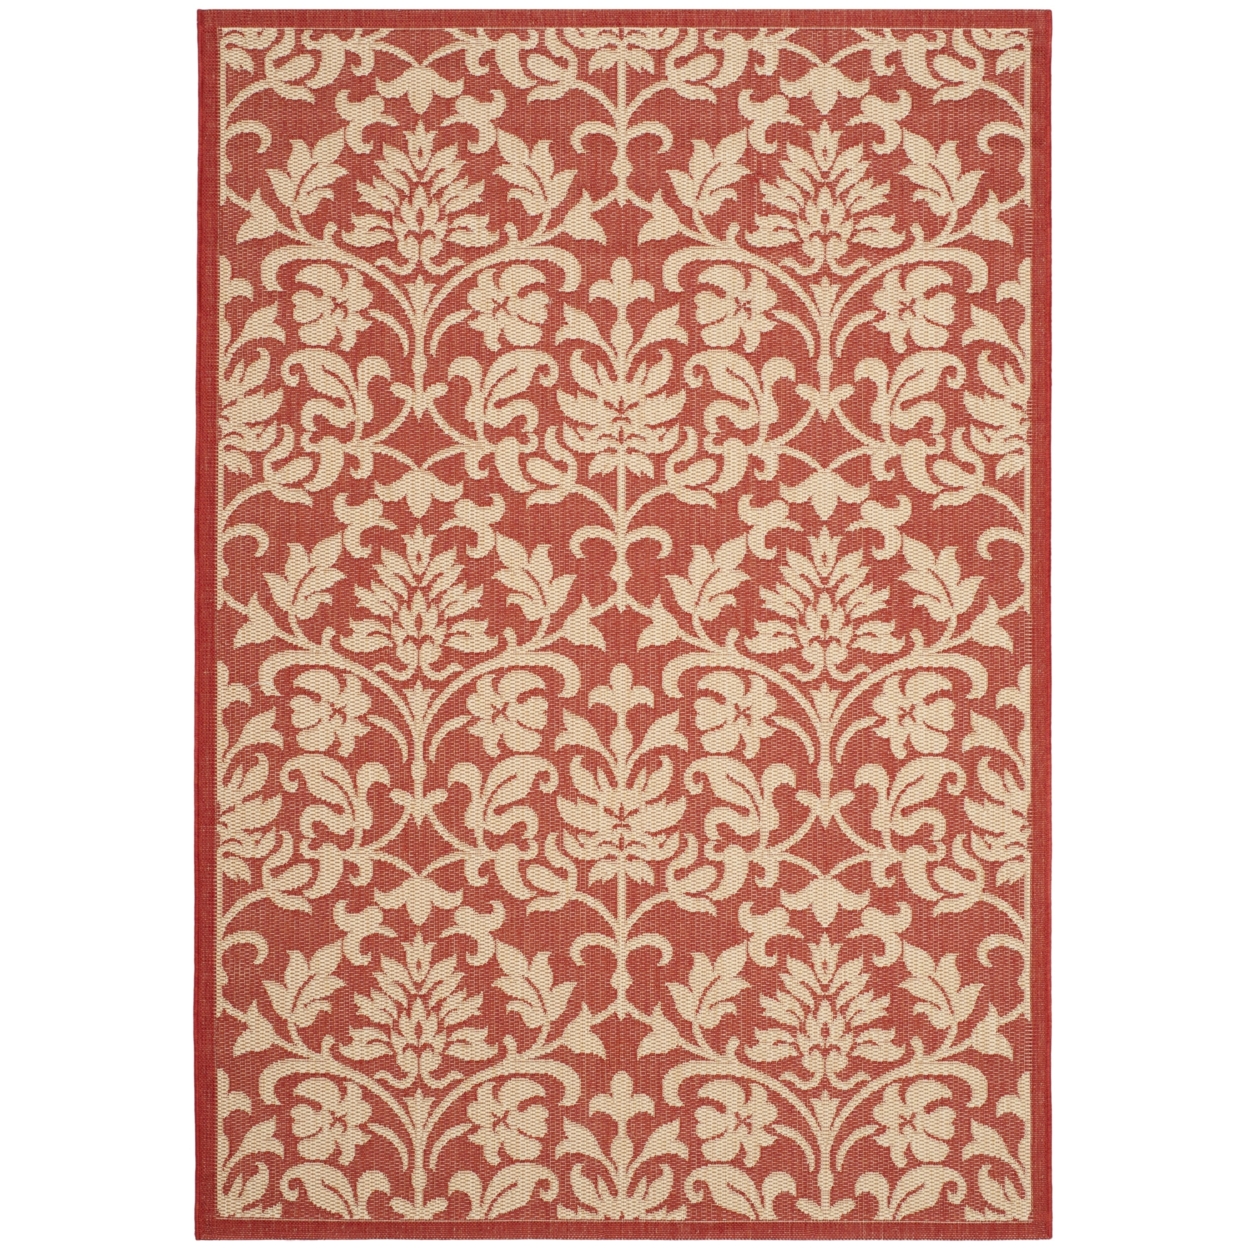 SAFAVIEH Courtyard Yvette Floral Indoor/Outdoor Area Rug, 5'3" x 7'7", Red/Natural - image 1 of 10